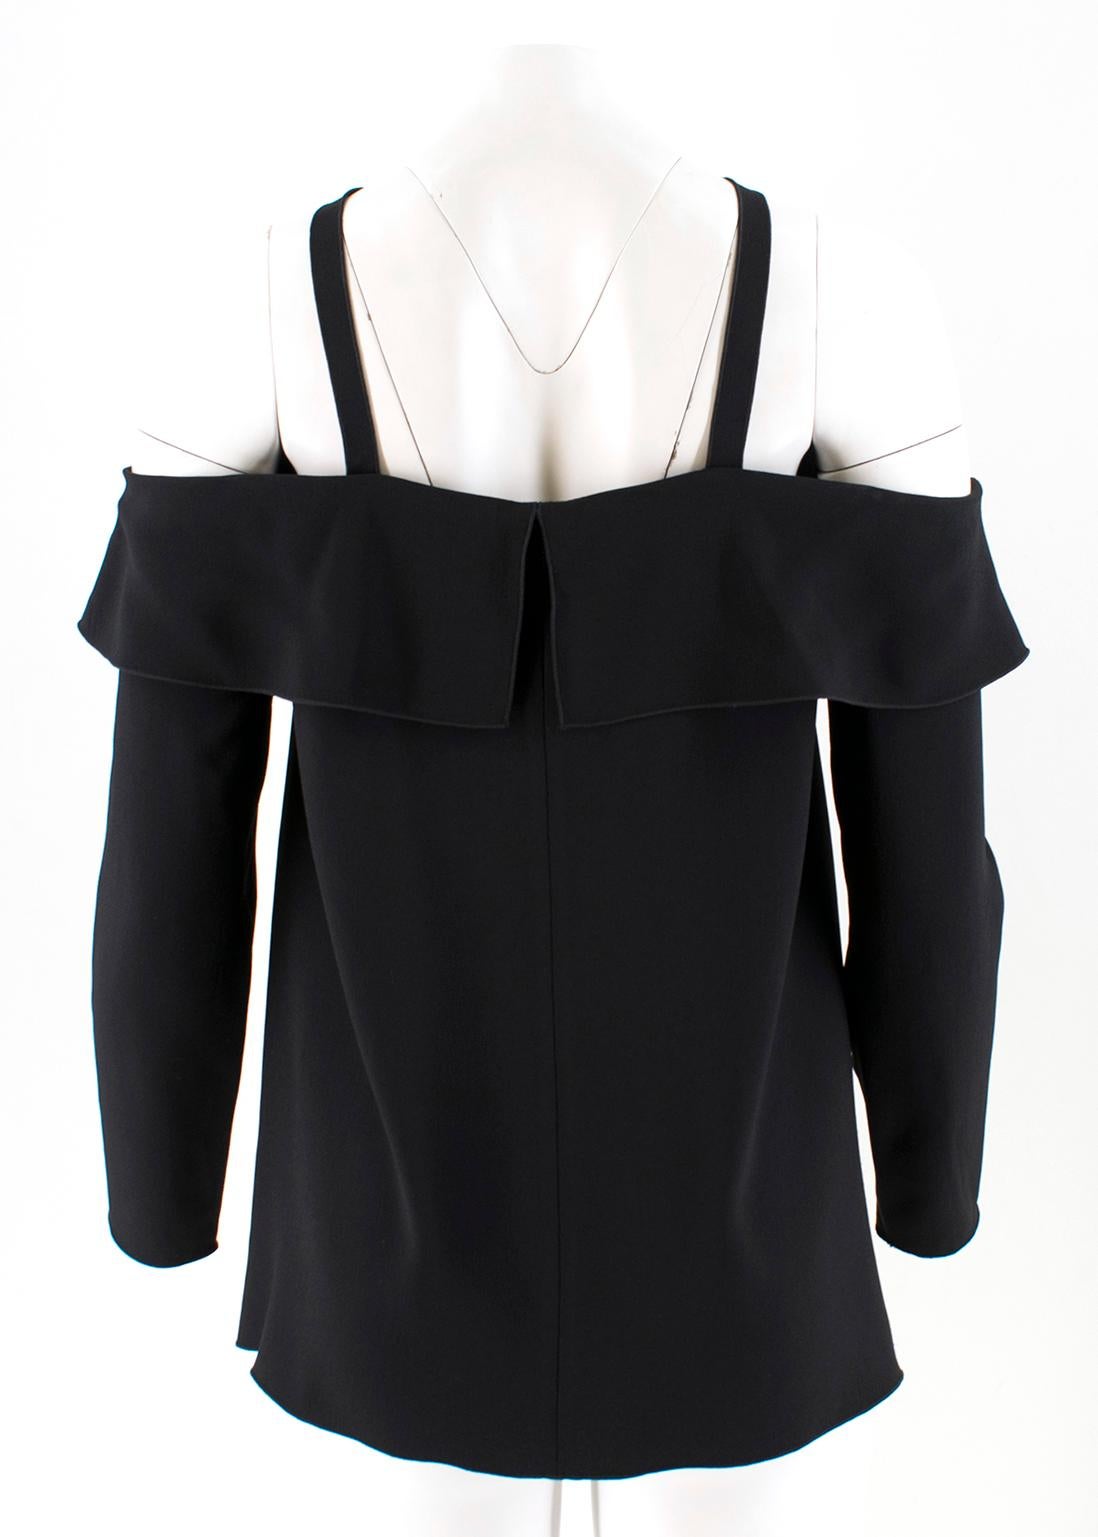 Proenza Schouler Cold-Shoulders Long Sleeved Black Top US 0-2 In Excellent Condition For Sale In London, GB